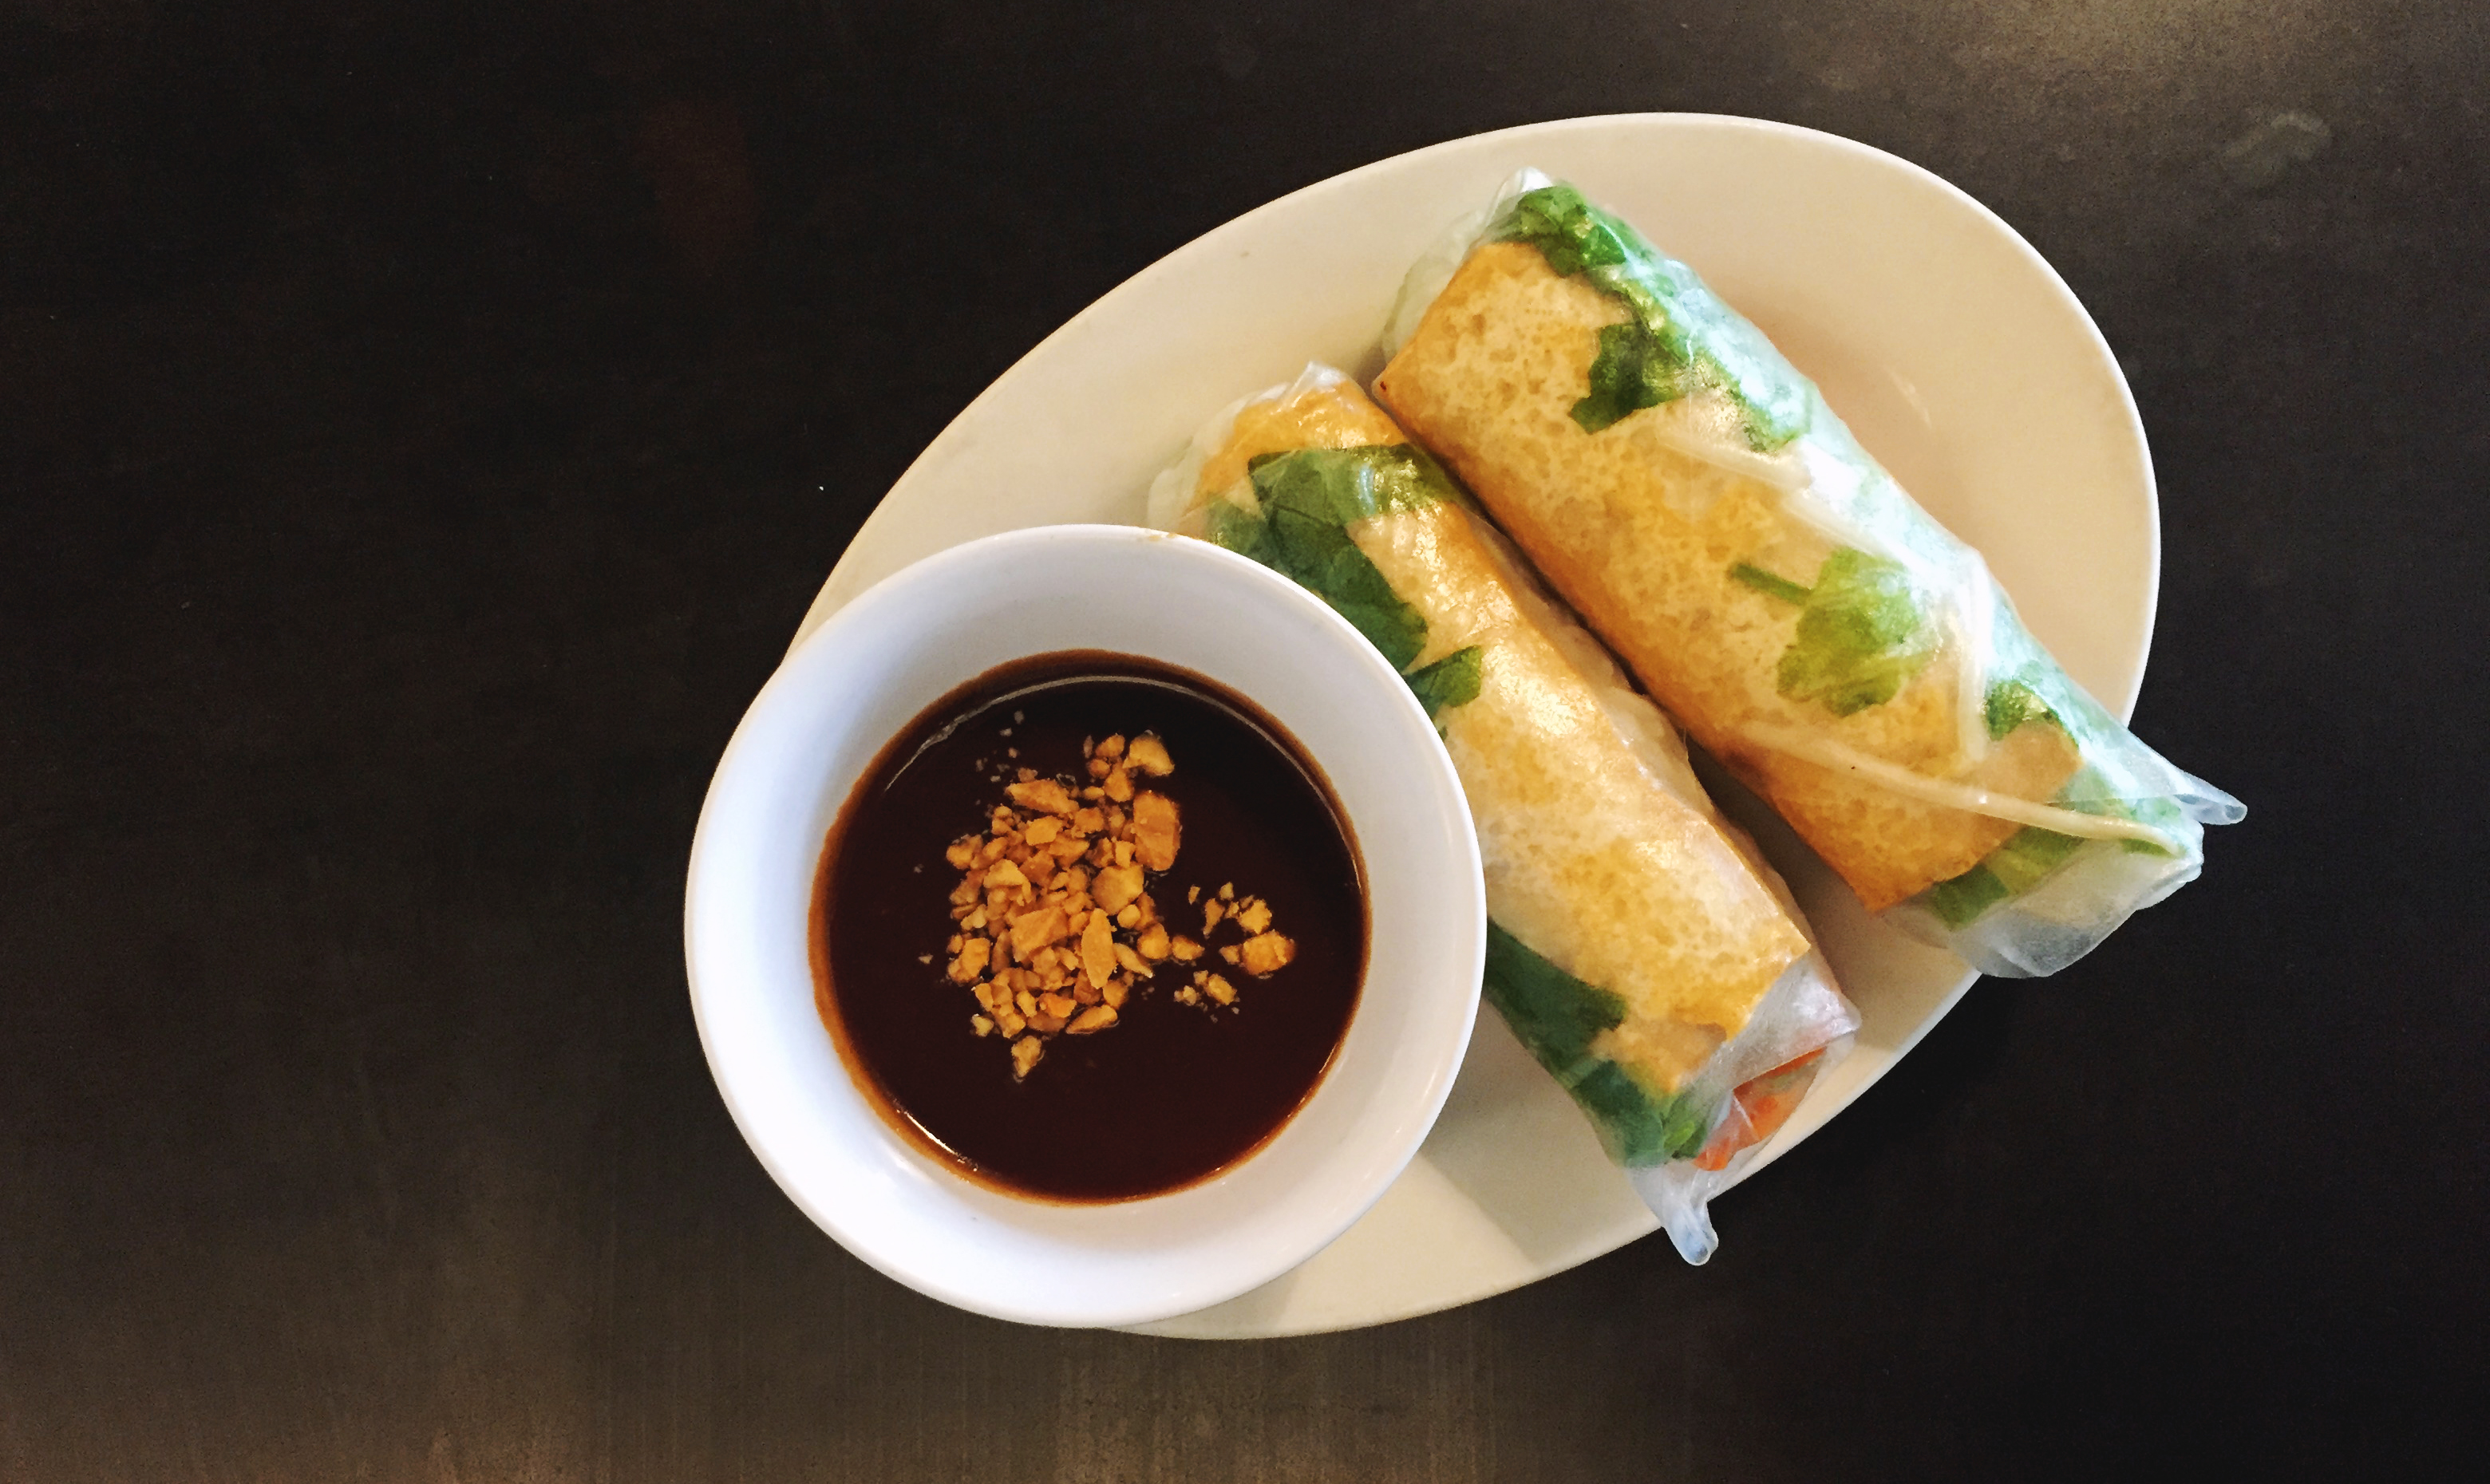 Tofu spring rolls from Red Pier Asian Bistro.